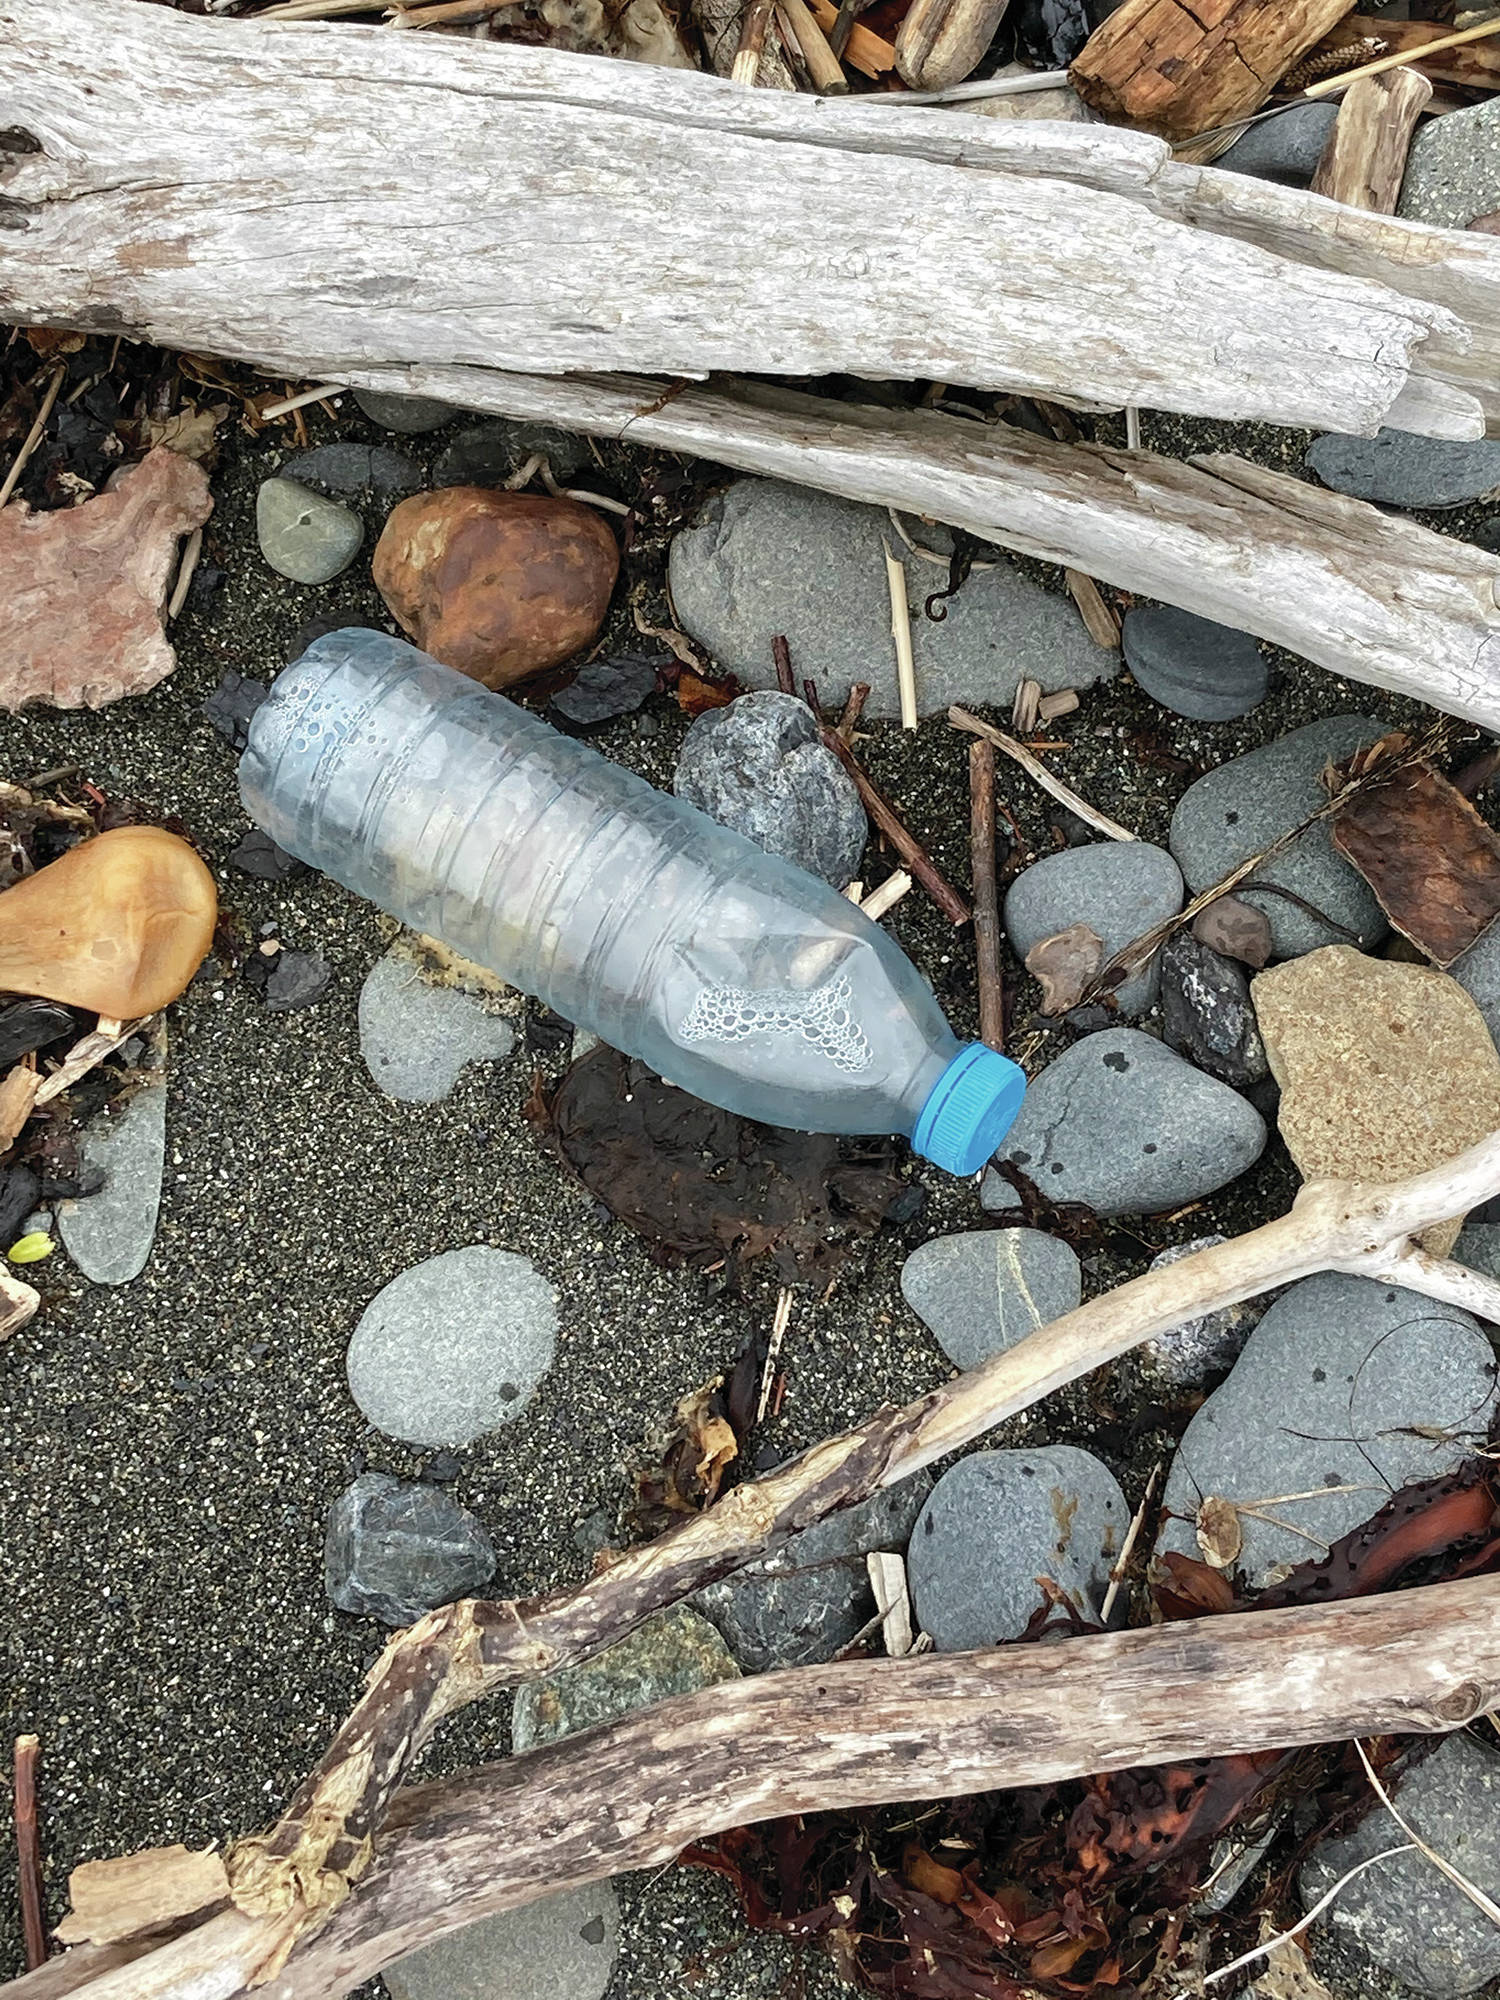 This Chinese water bottle is among items found on a CoastWalk done on Sunday, Oct. 4, 2020, on the Diamond Creek beach near Homer, Alaska. (Photo by Michael Armstrong/Homer News)